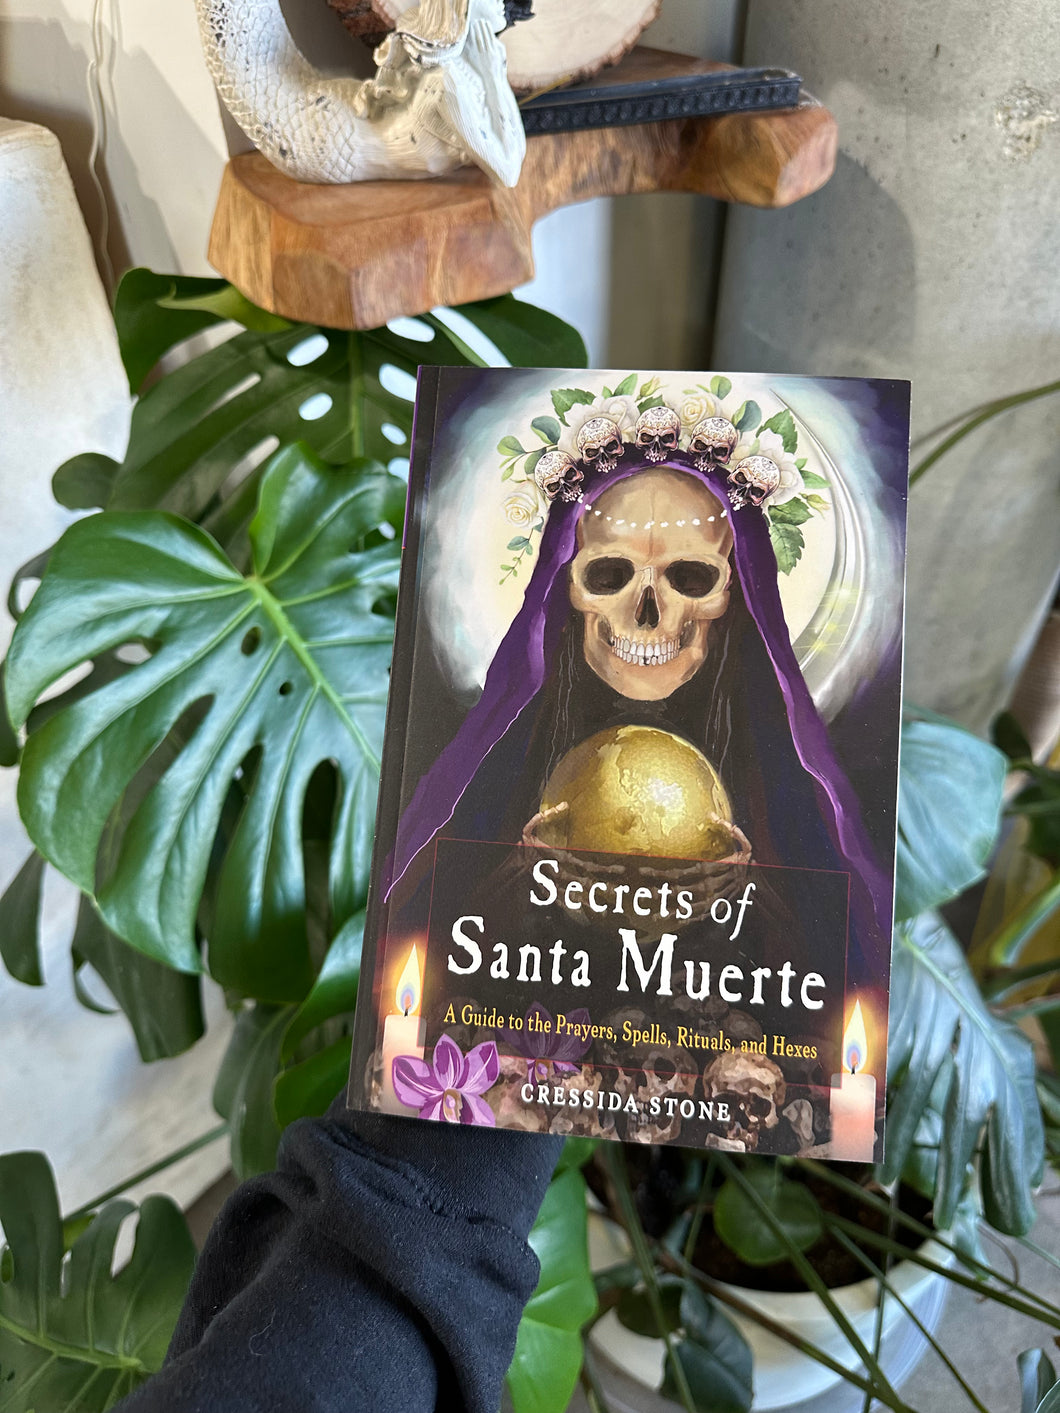 Secrets of Santa Muerte: A Guide to the Prayers, Spells, Rituals, and Hexes Paperback by Cressida Stone